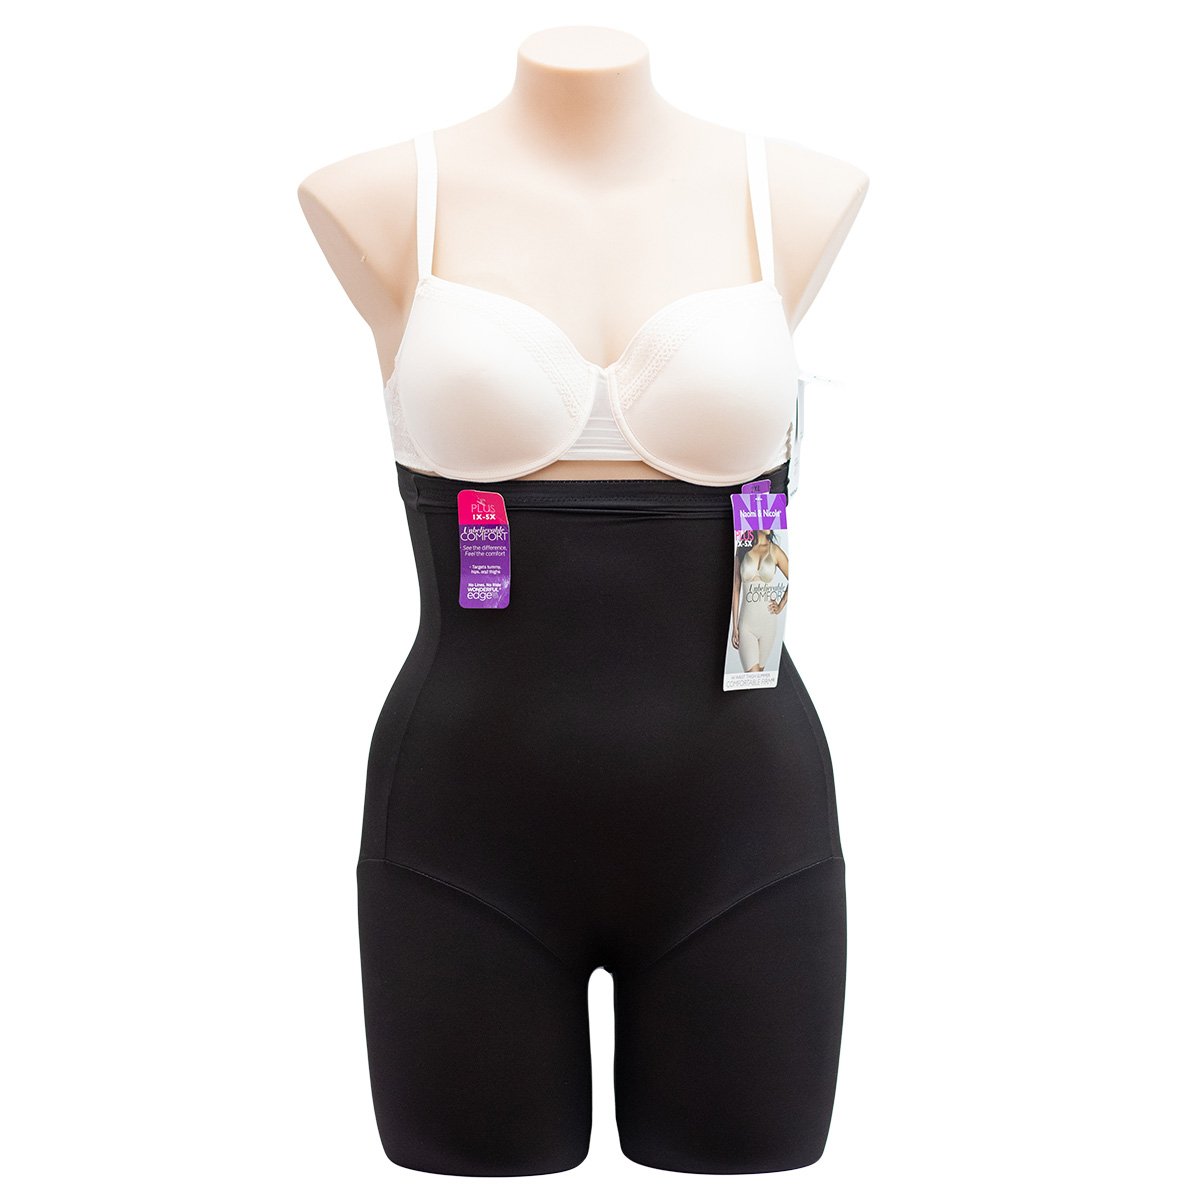 Naomi & Nicole Hi Waist Thigh Slimmer Comfortable Firm 7779 - Shapewear Black / 16 / XL  Available at Illusions Lingerie